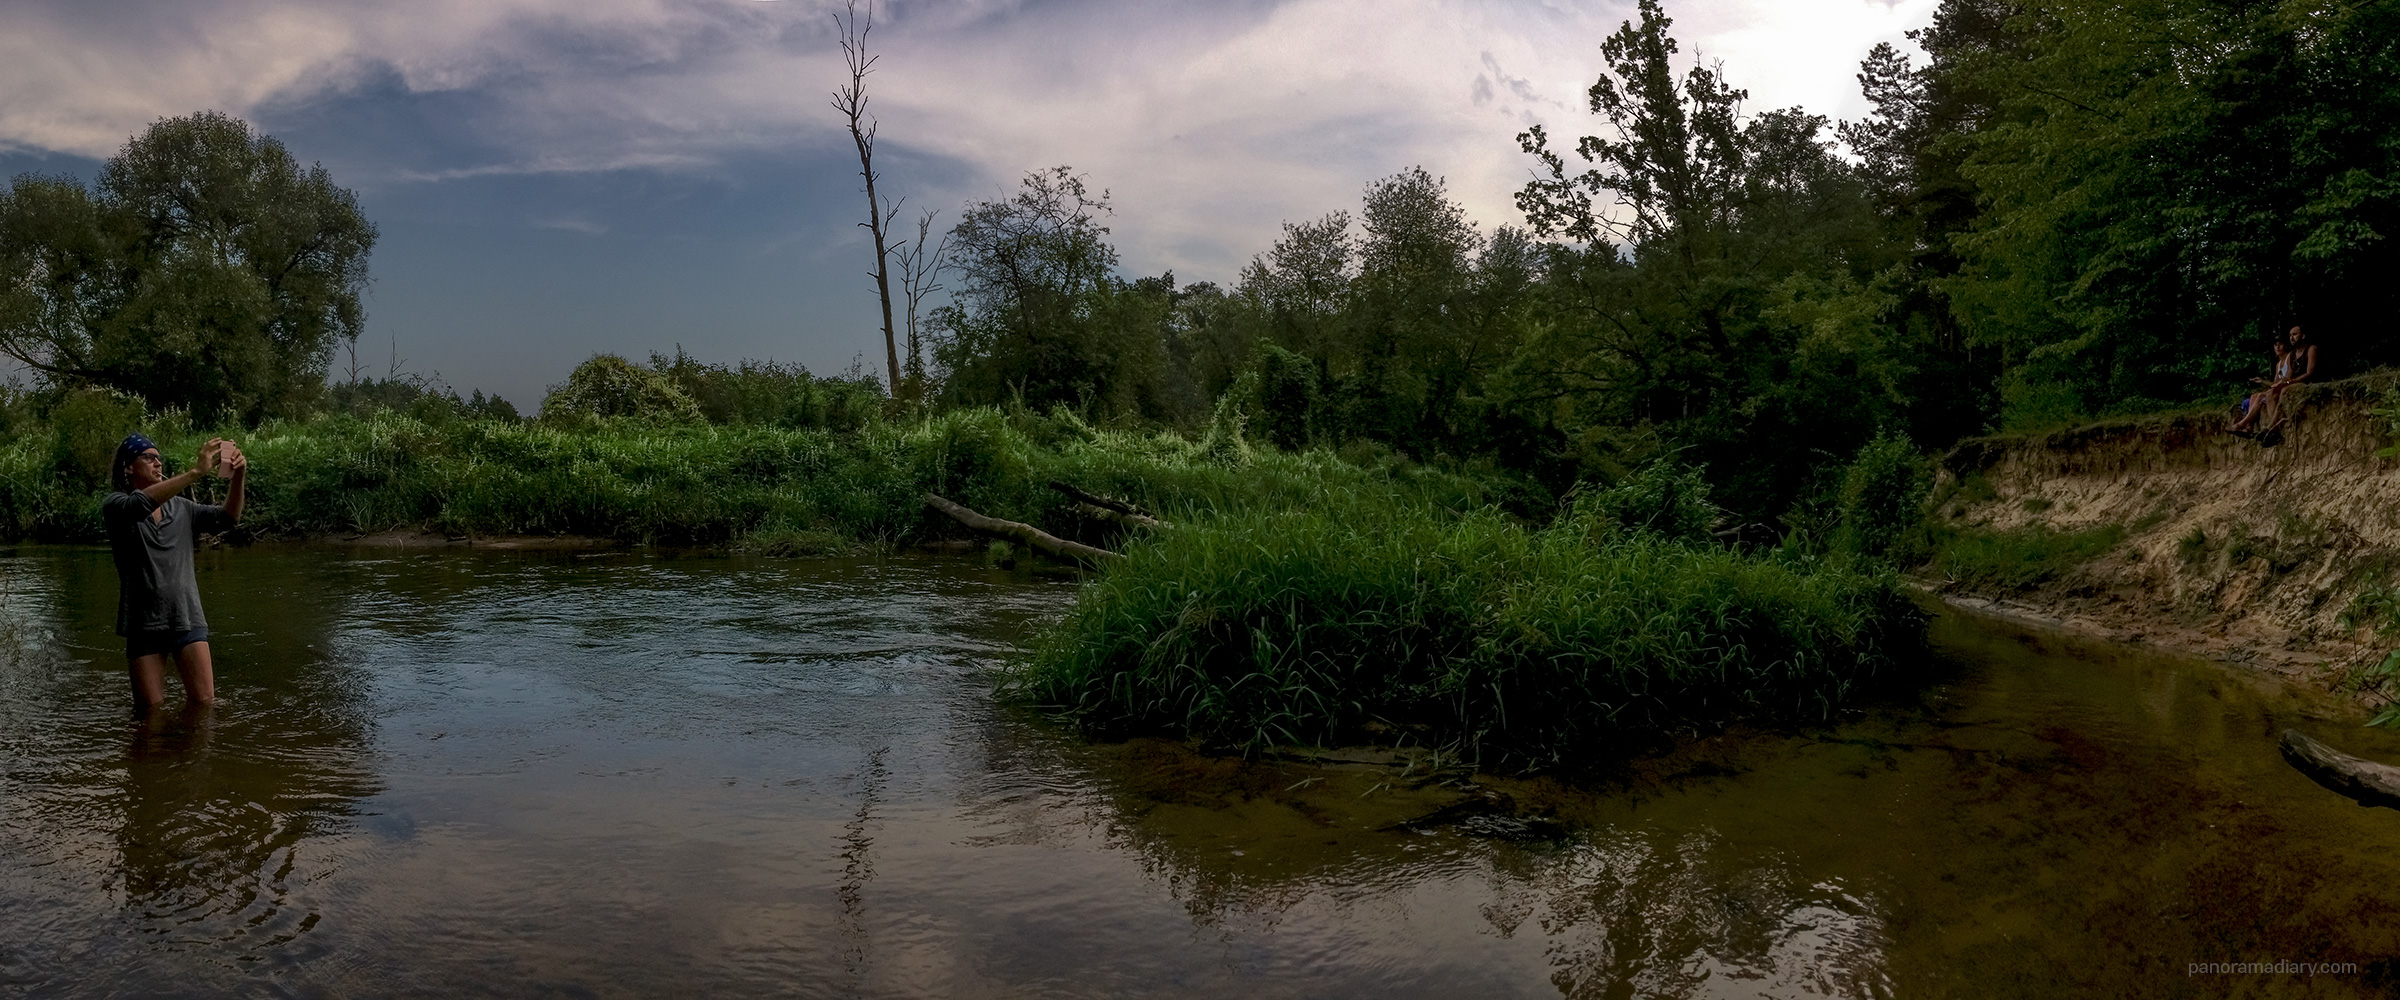 Taking picture from the Rawka river | PANORAMA DIARY